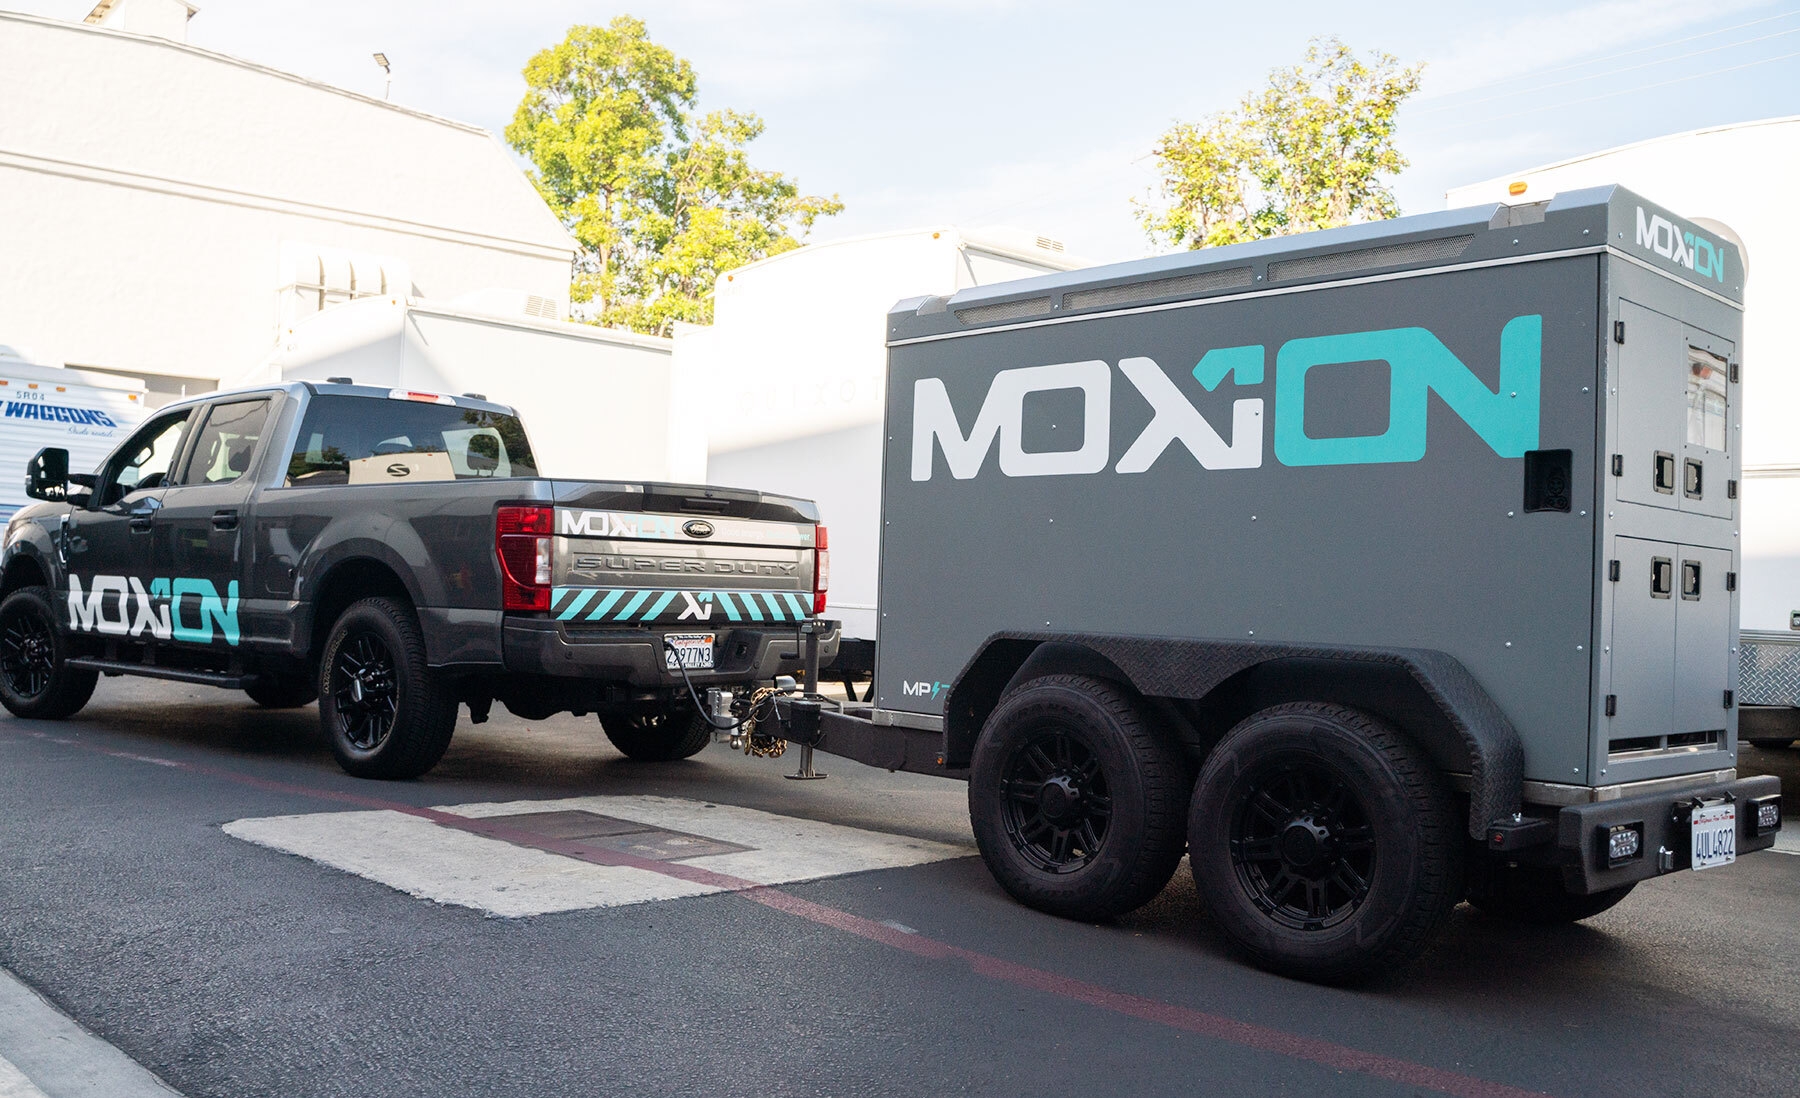 A truck towing a small trailer in the backlots of a movie studio, both with the Moxion Power logo.